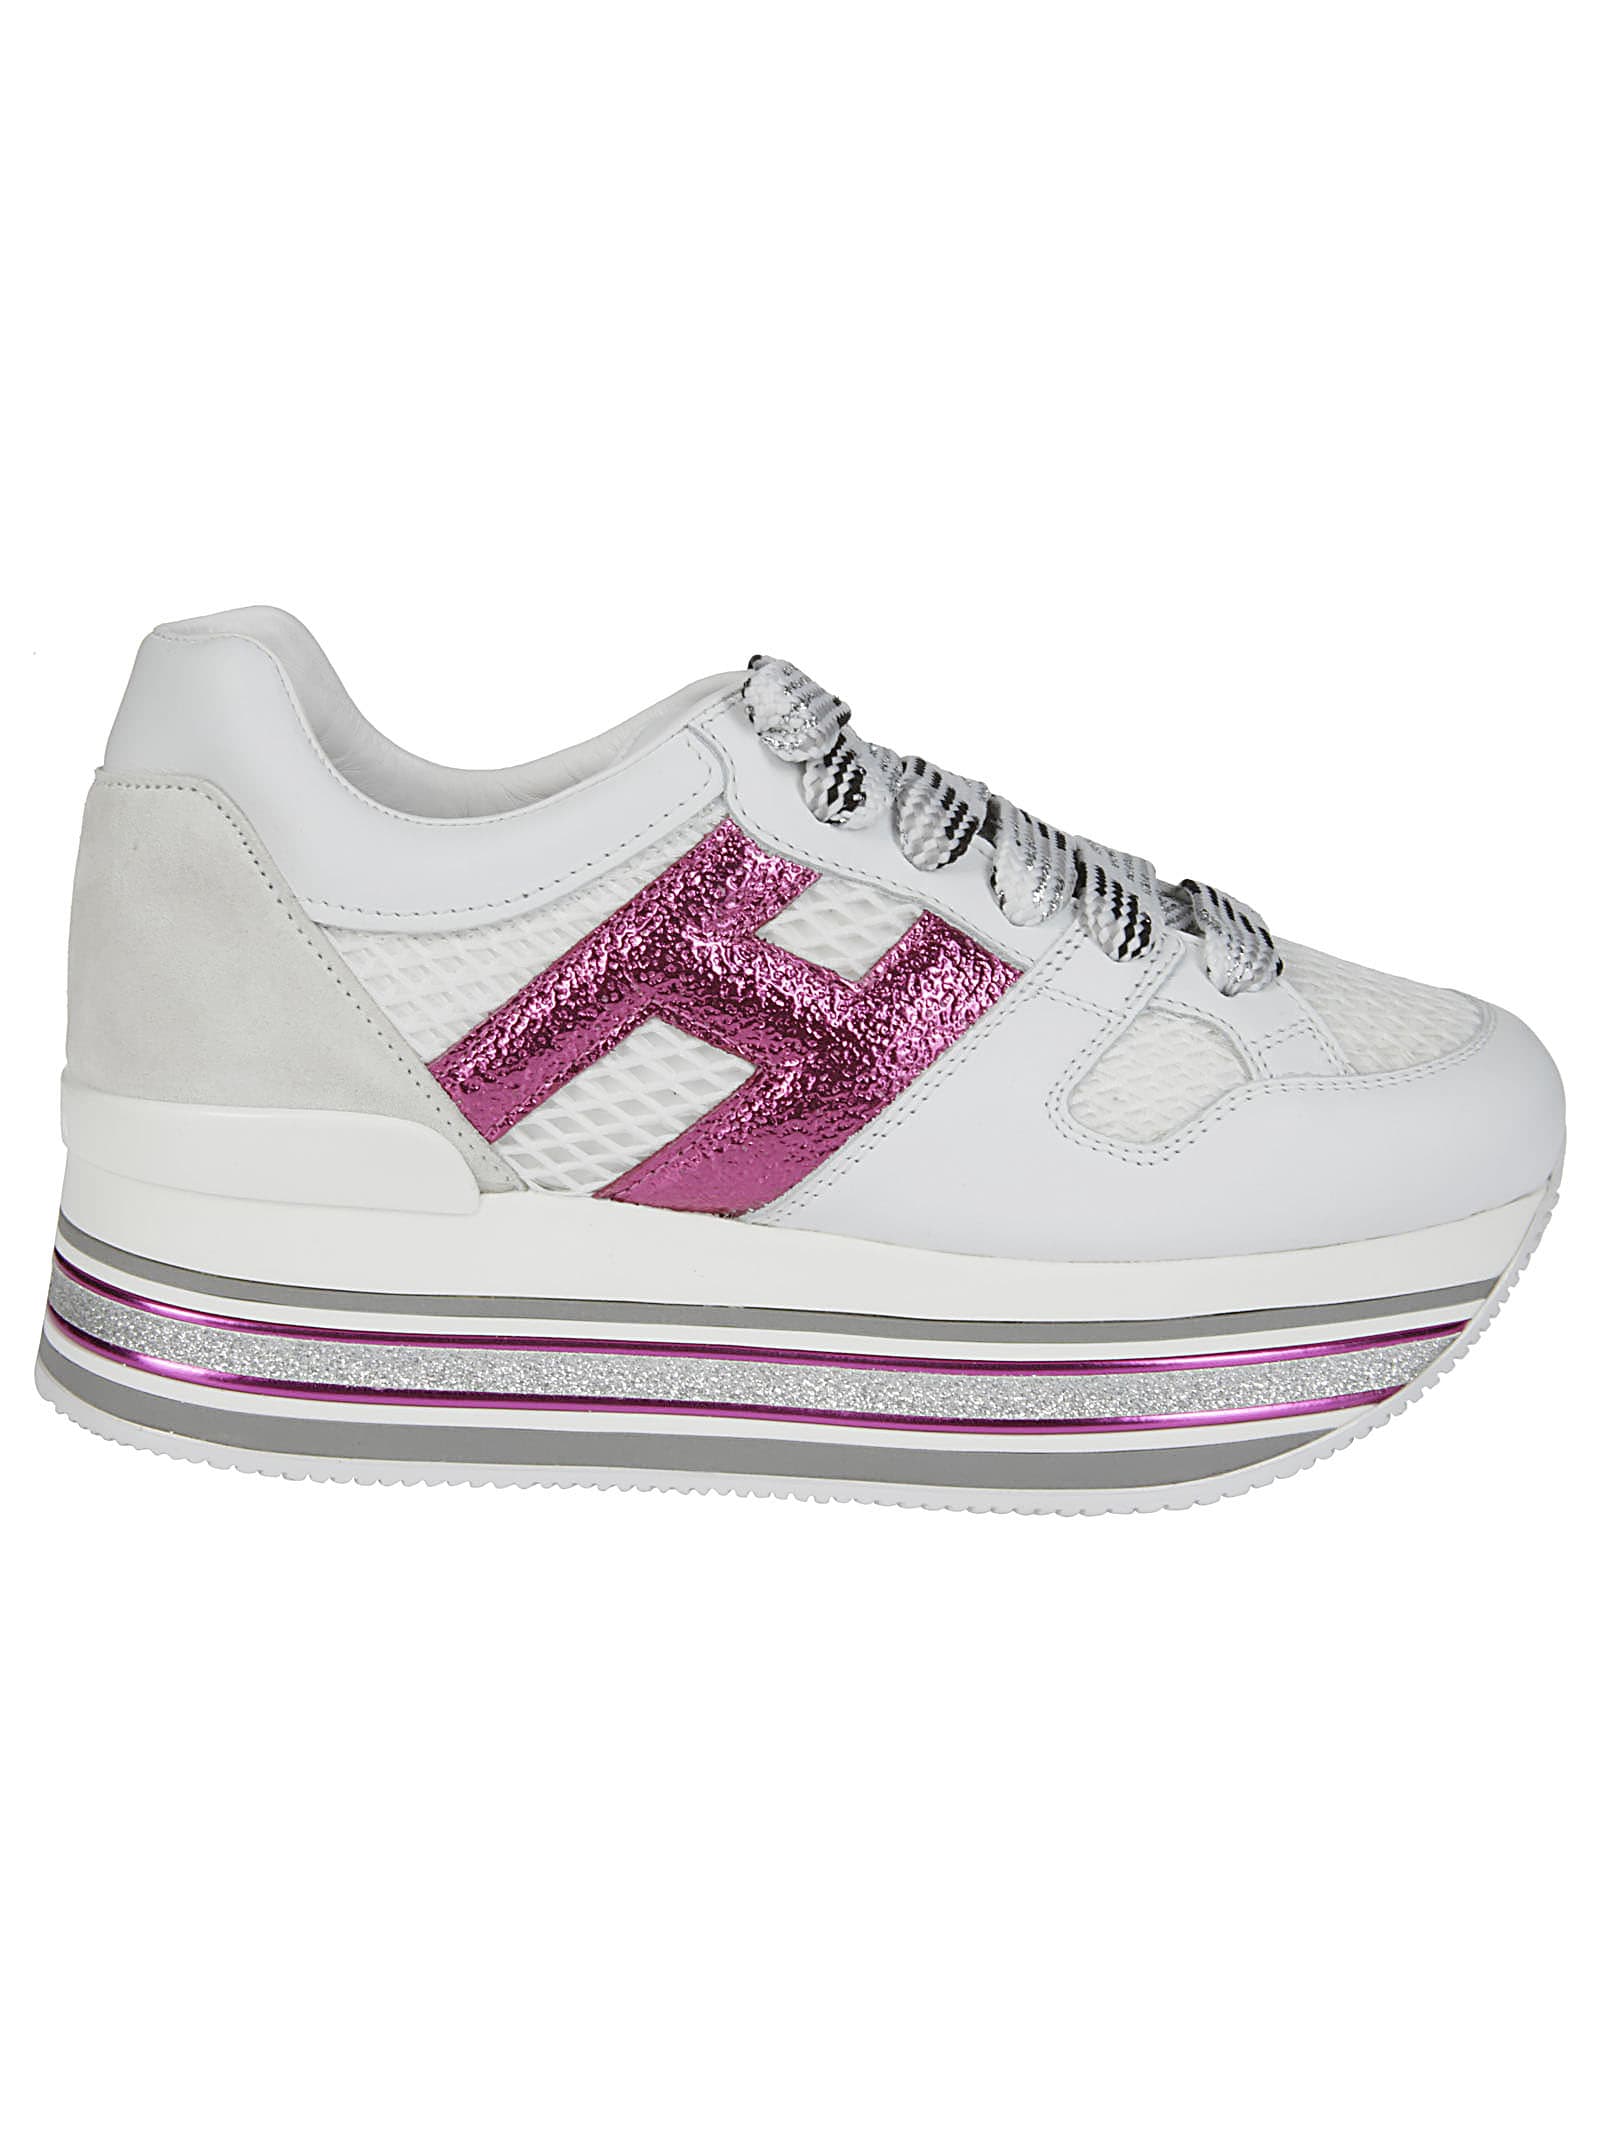 HOGAN WHITE LEATHER H516 SNEAKERS,11238576